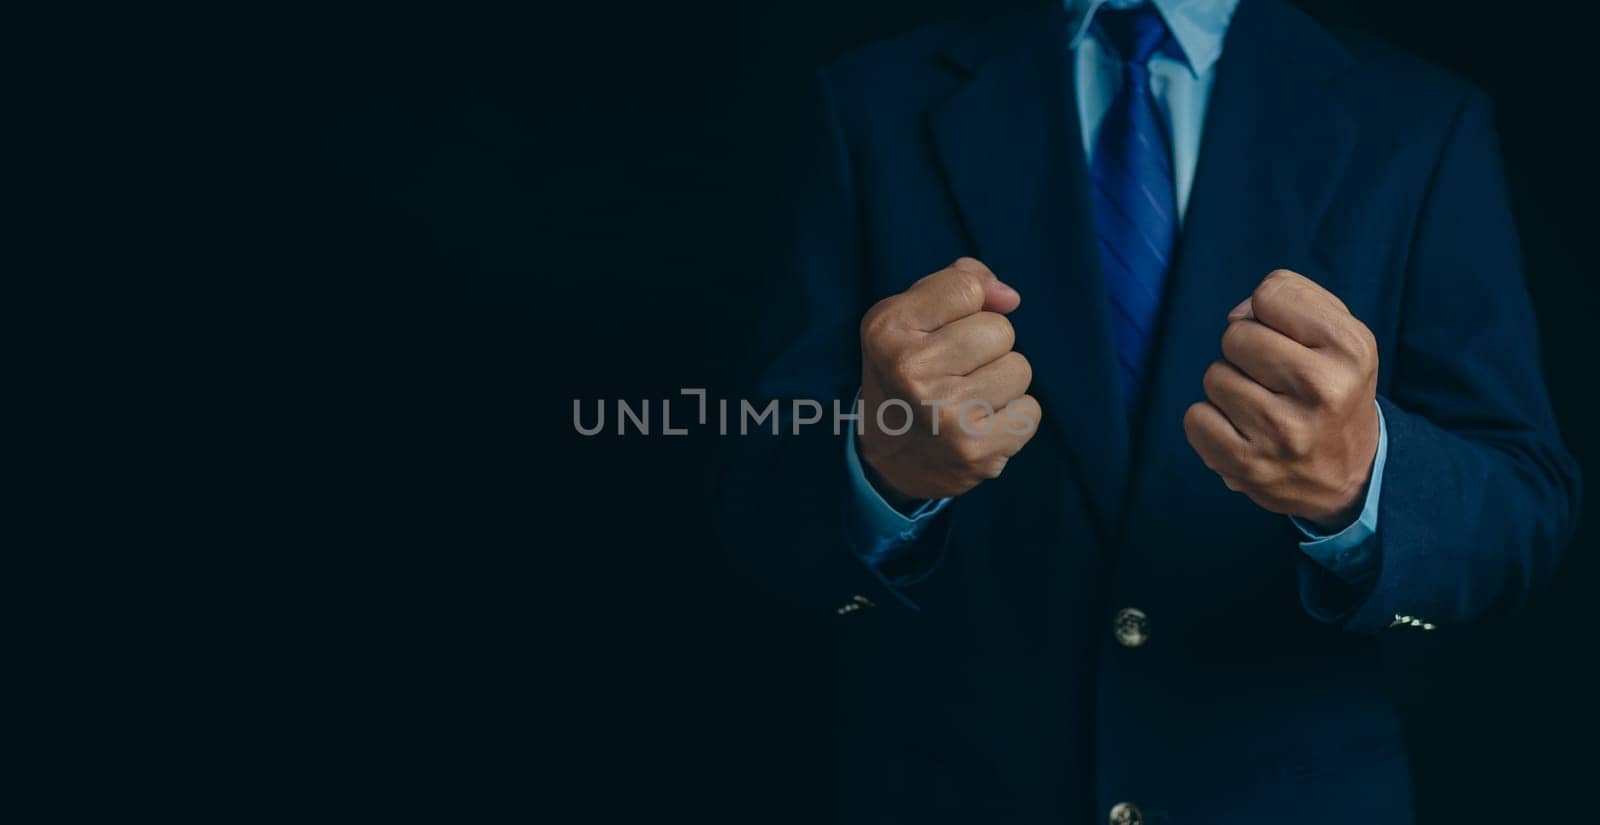 Businessman in a suit stands and makes a fist gesture on a dark background.